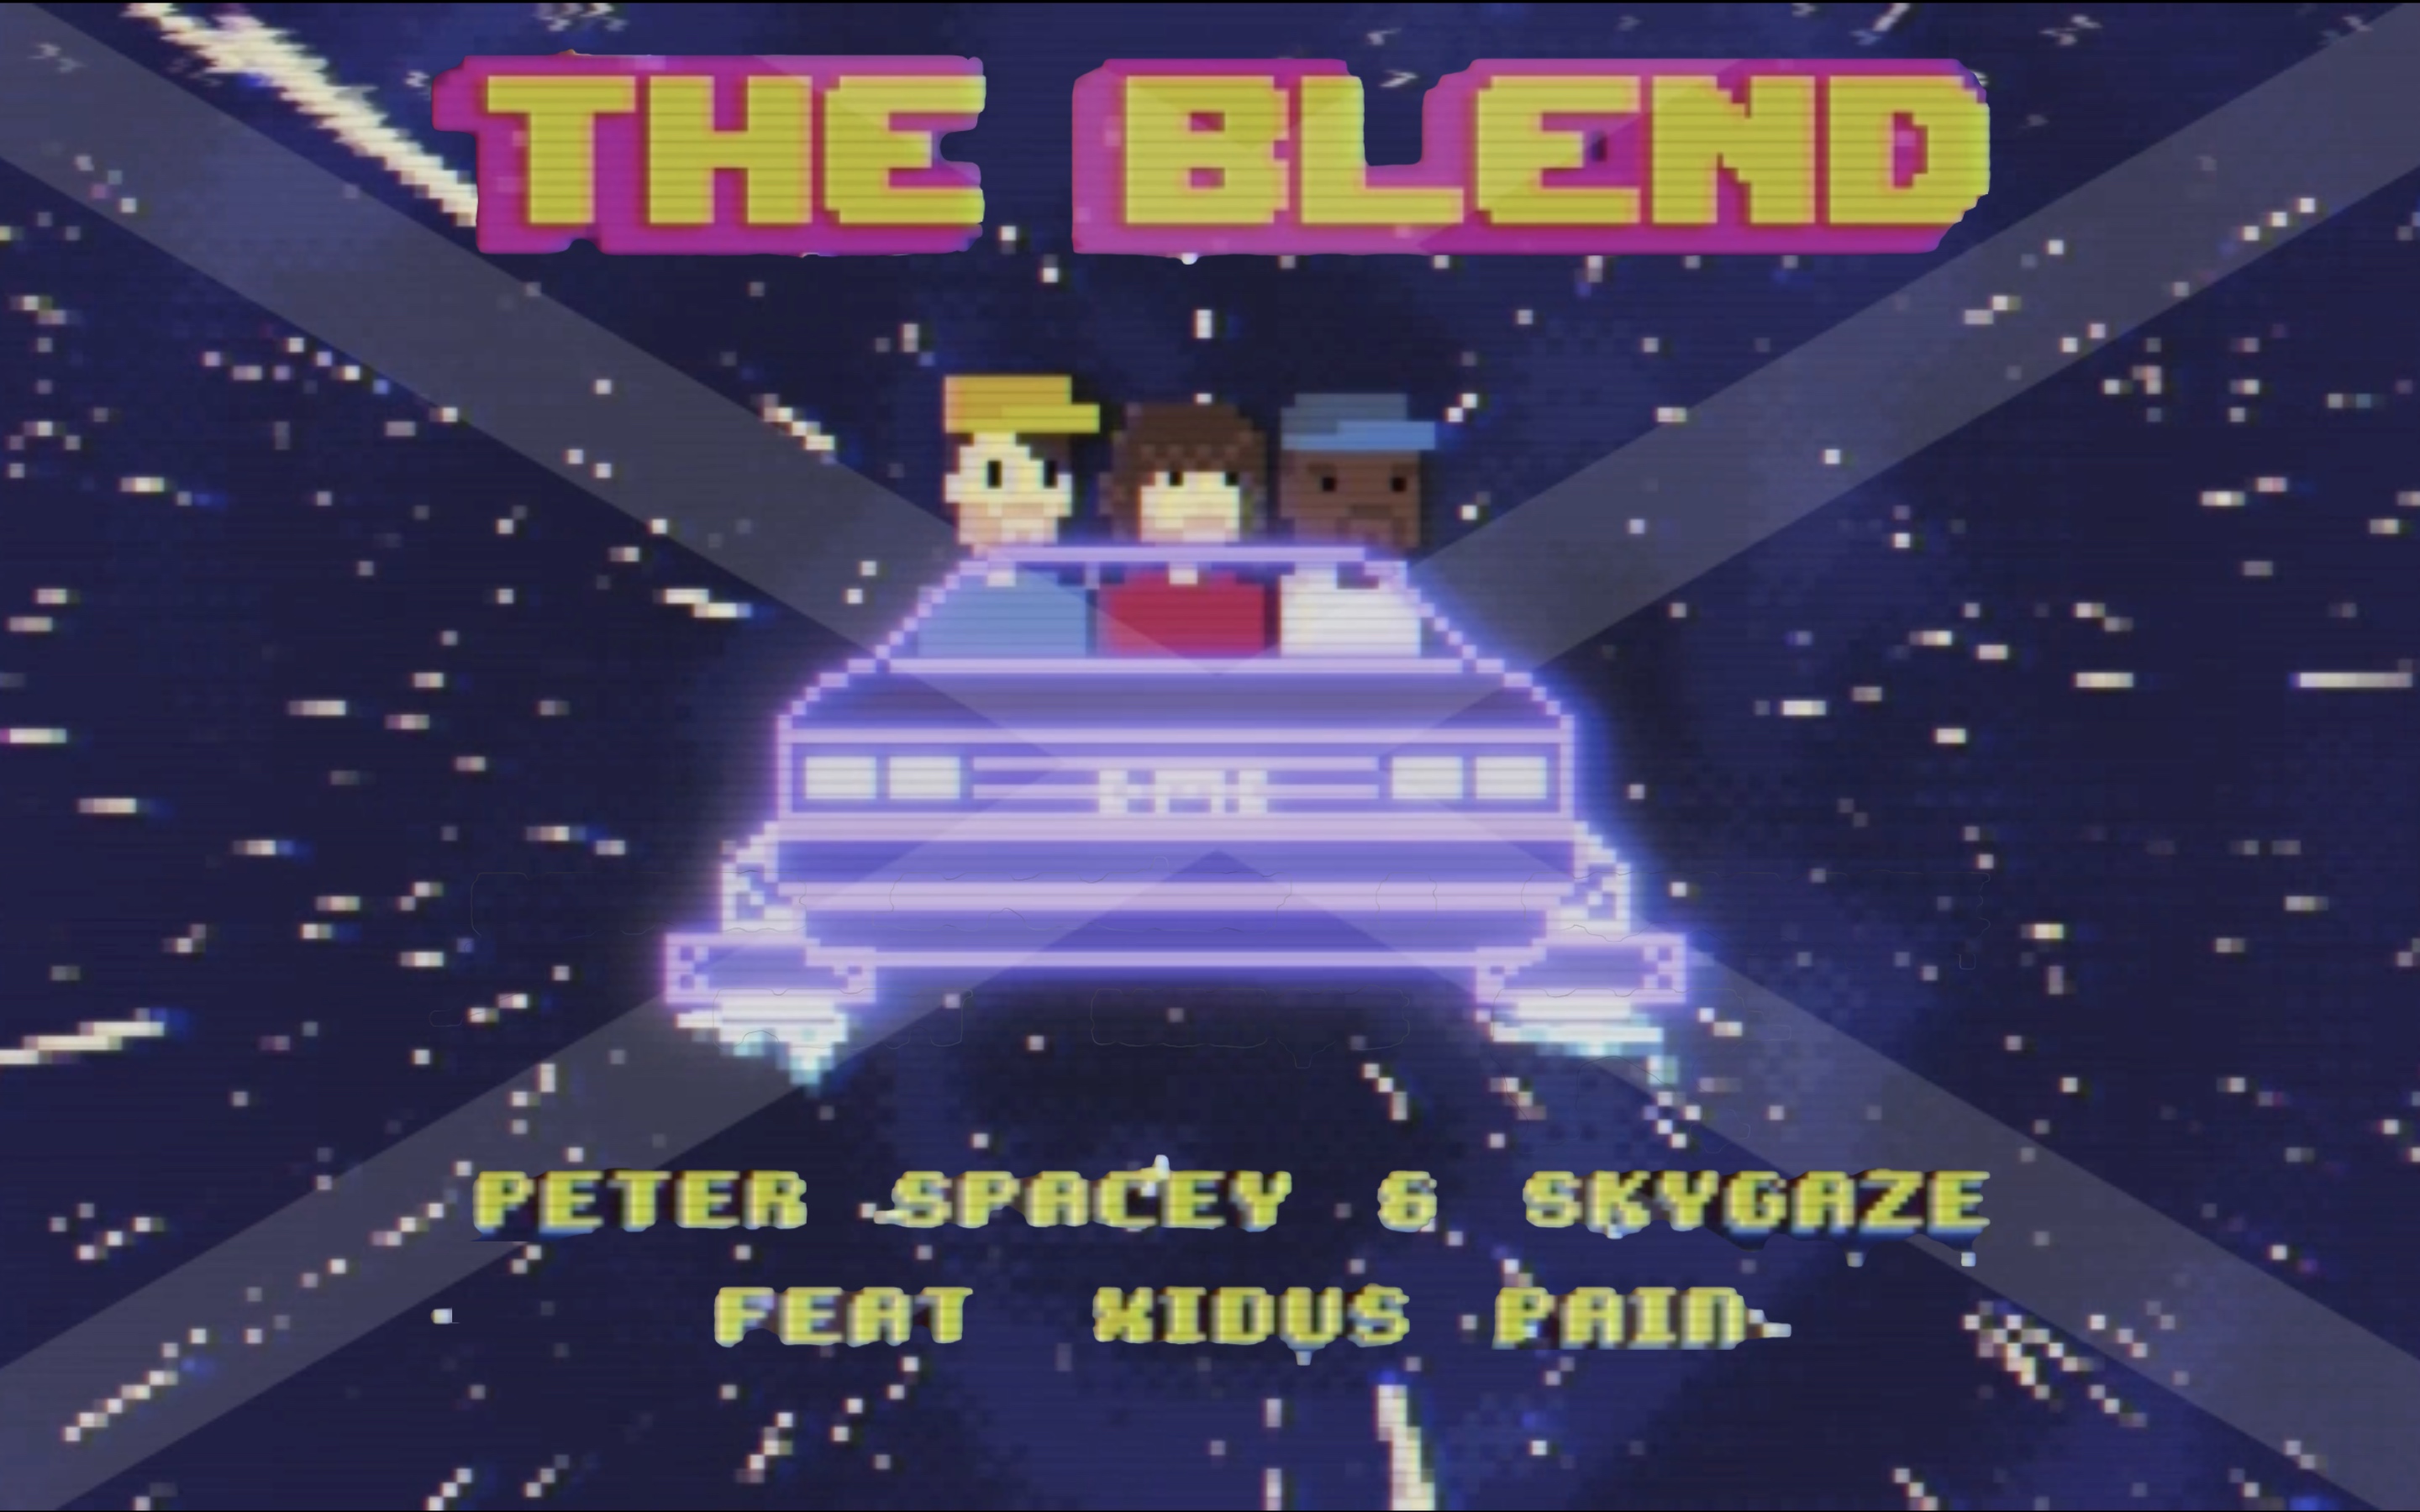 Peter Spacey x SKYGAZE x Xidus Pain – “The Blend”